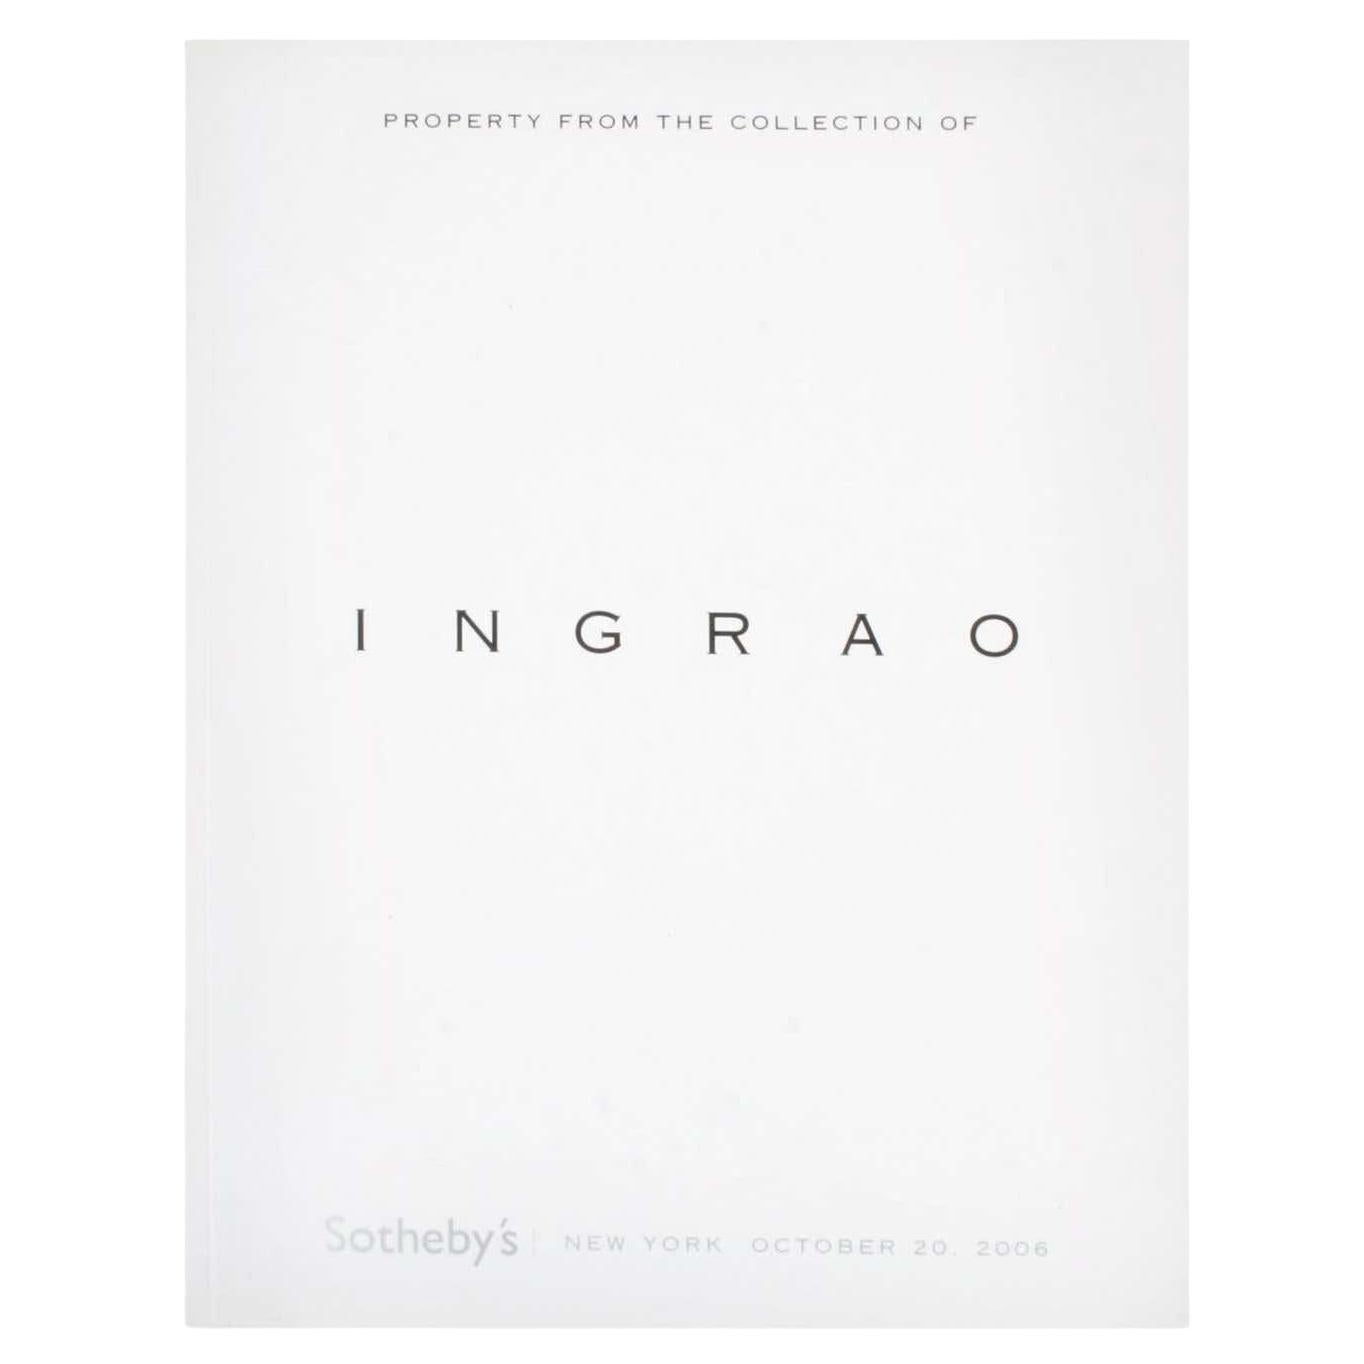 "Sotheby's: Property From The Collection of Ingrao, New York, October 2006" Book